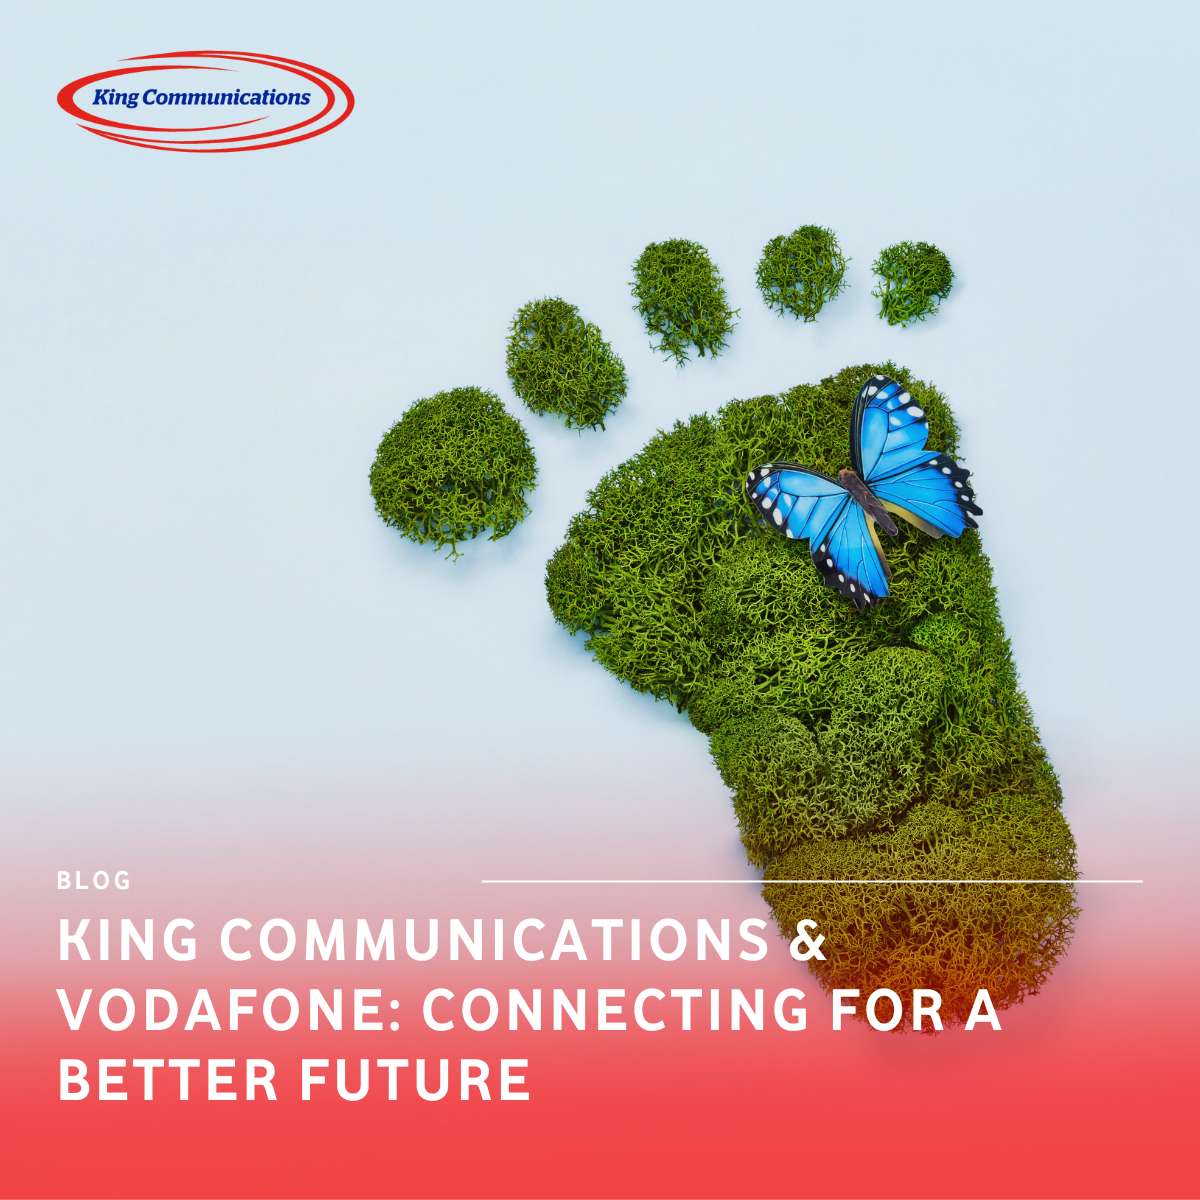 King Communications & Vodafone Connecting for a Better Future